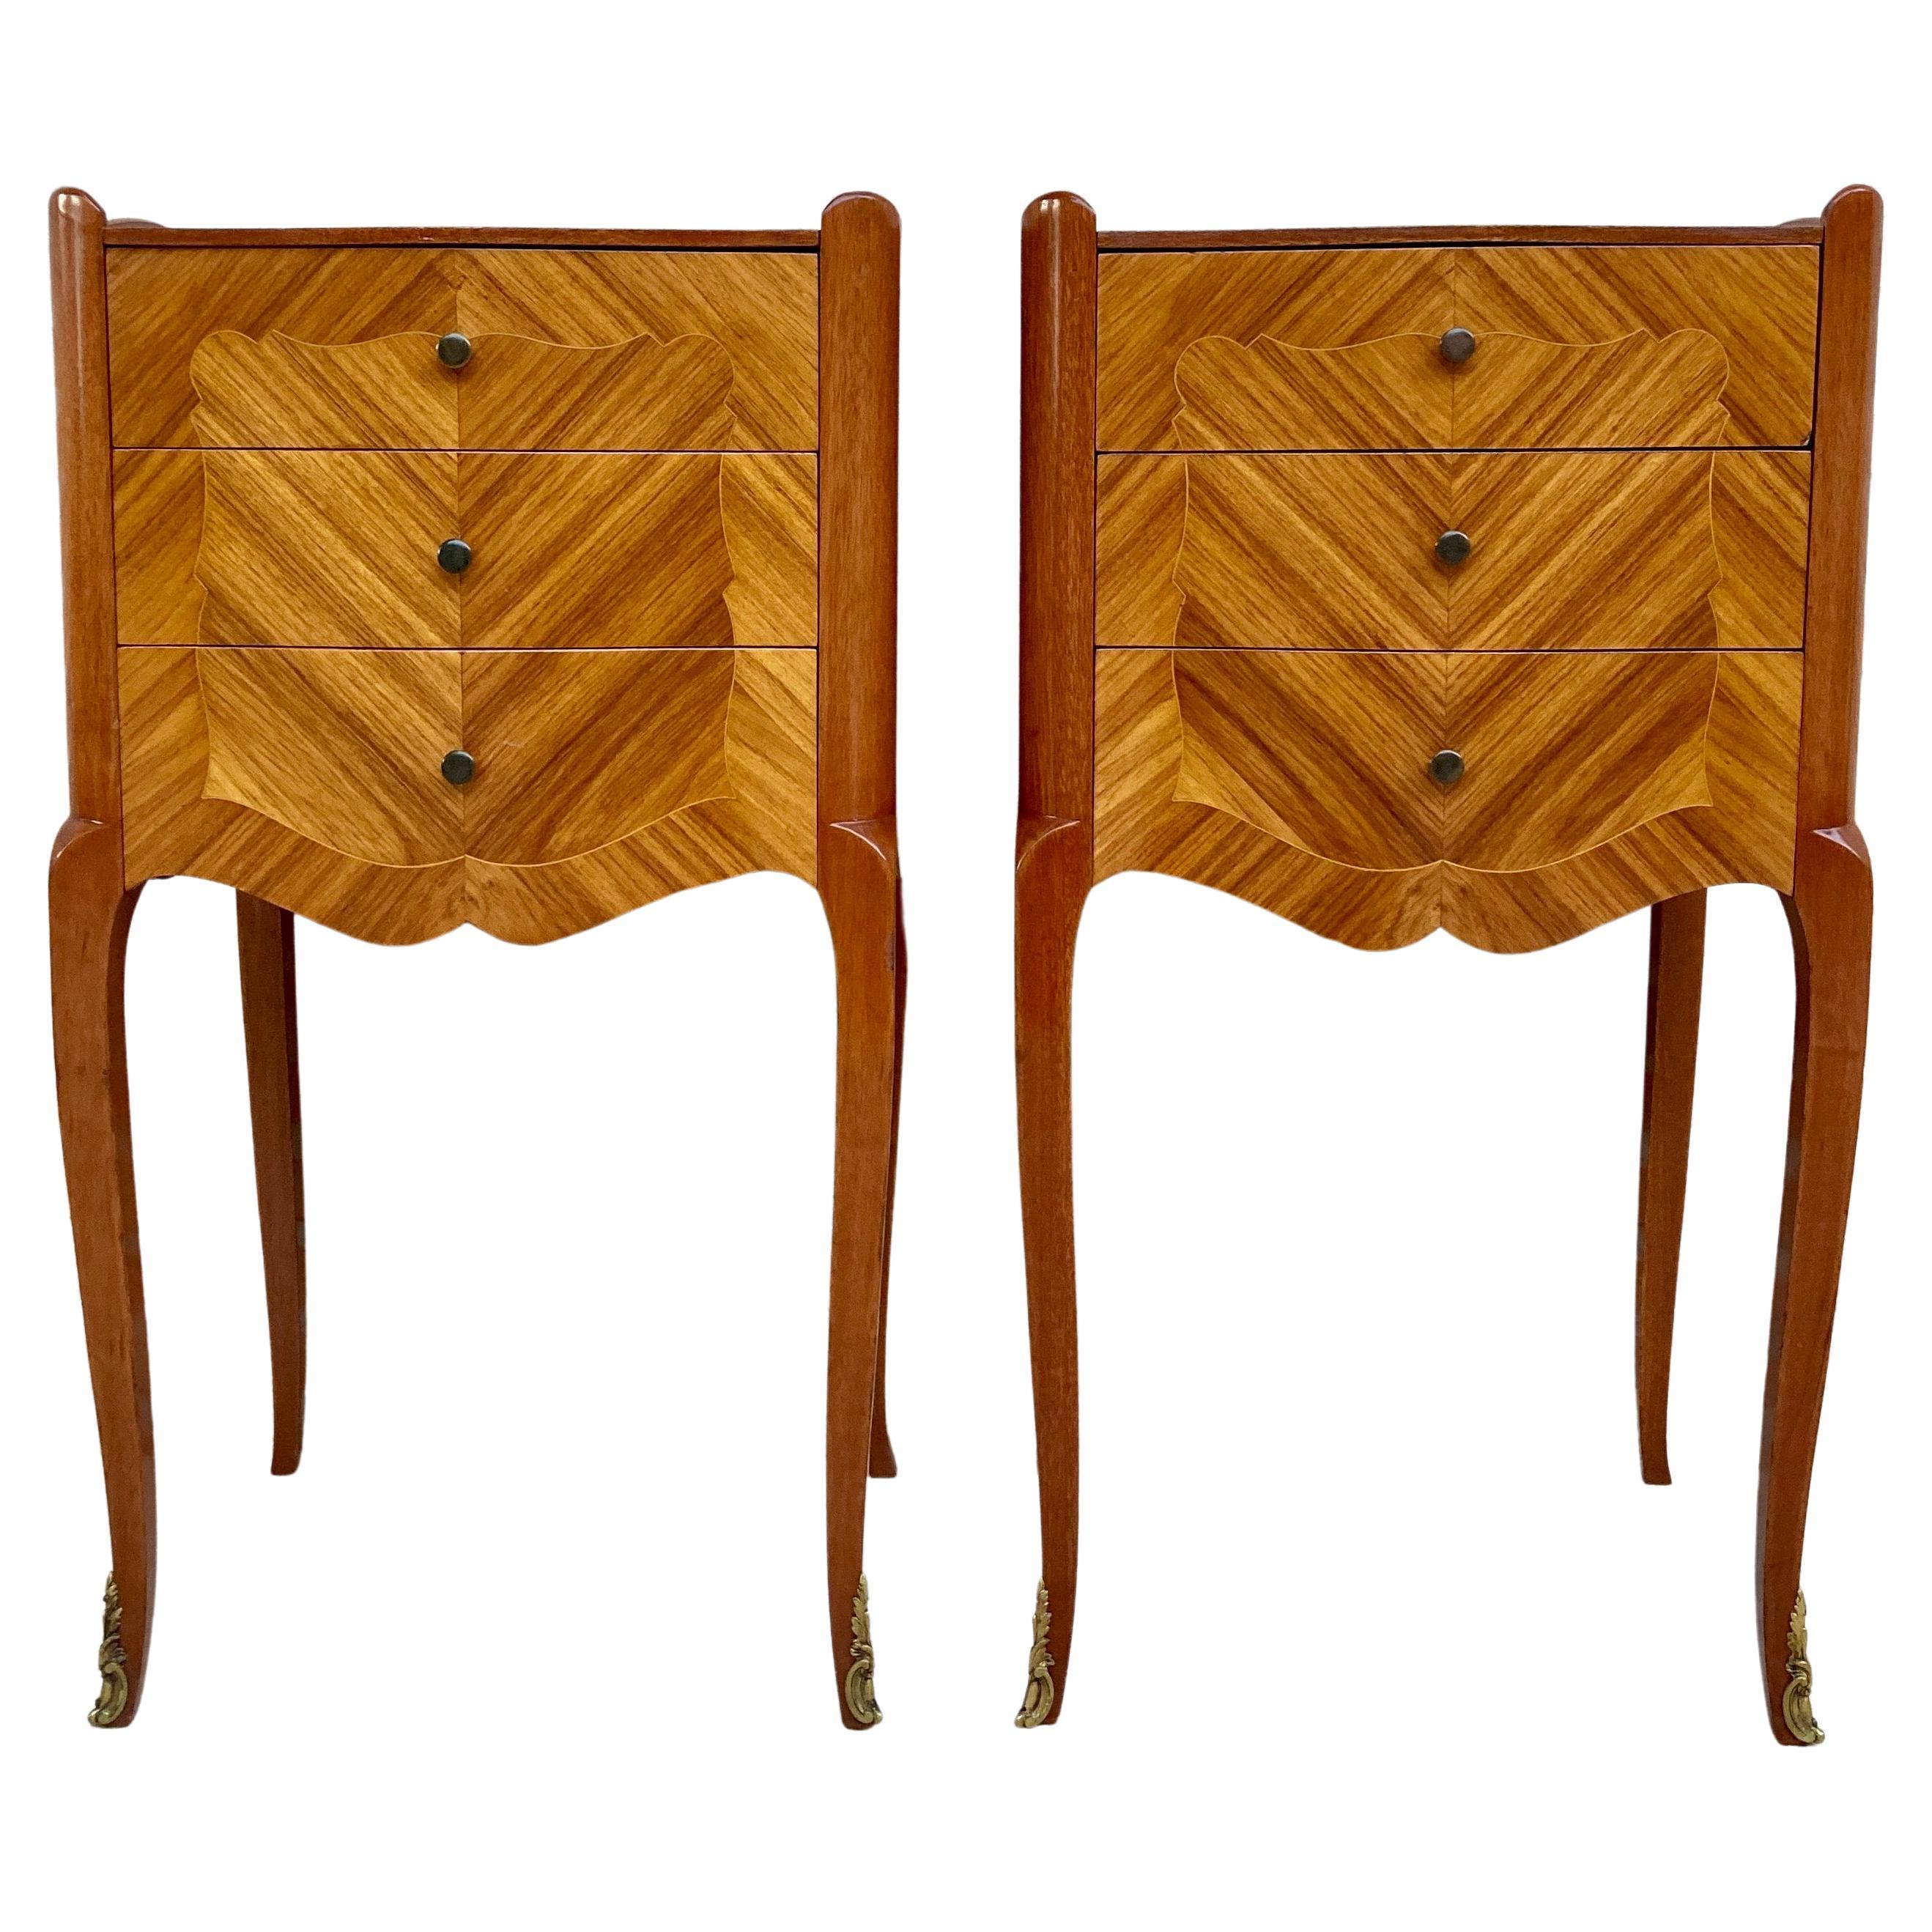 French Tulipwood Bedside Tables with Three Drawers, Set of 2